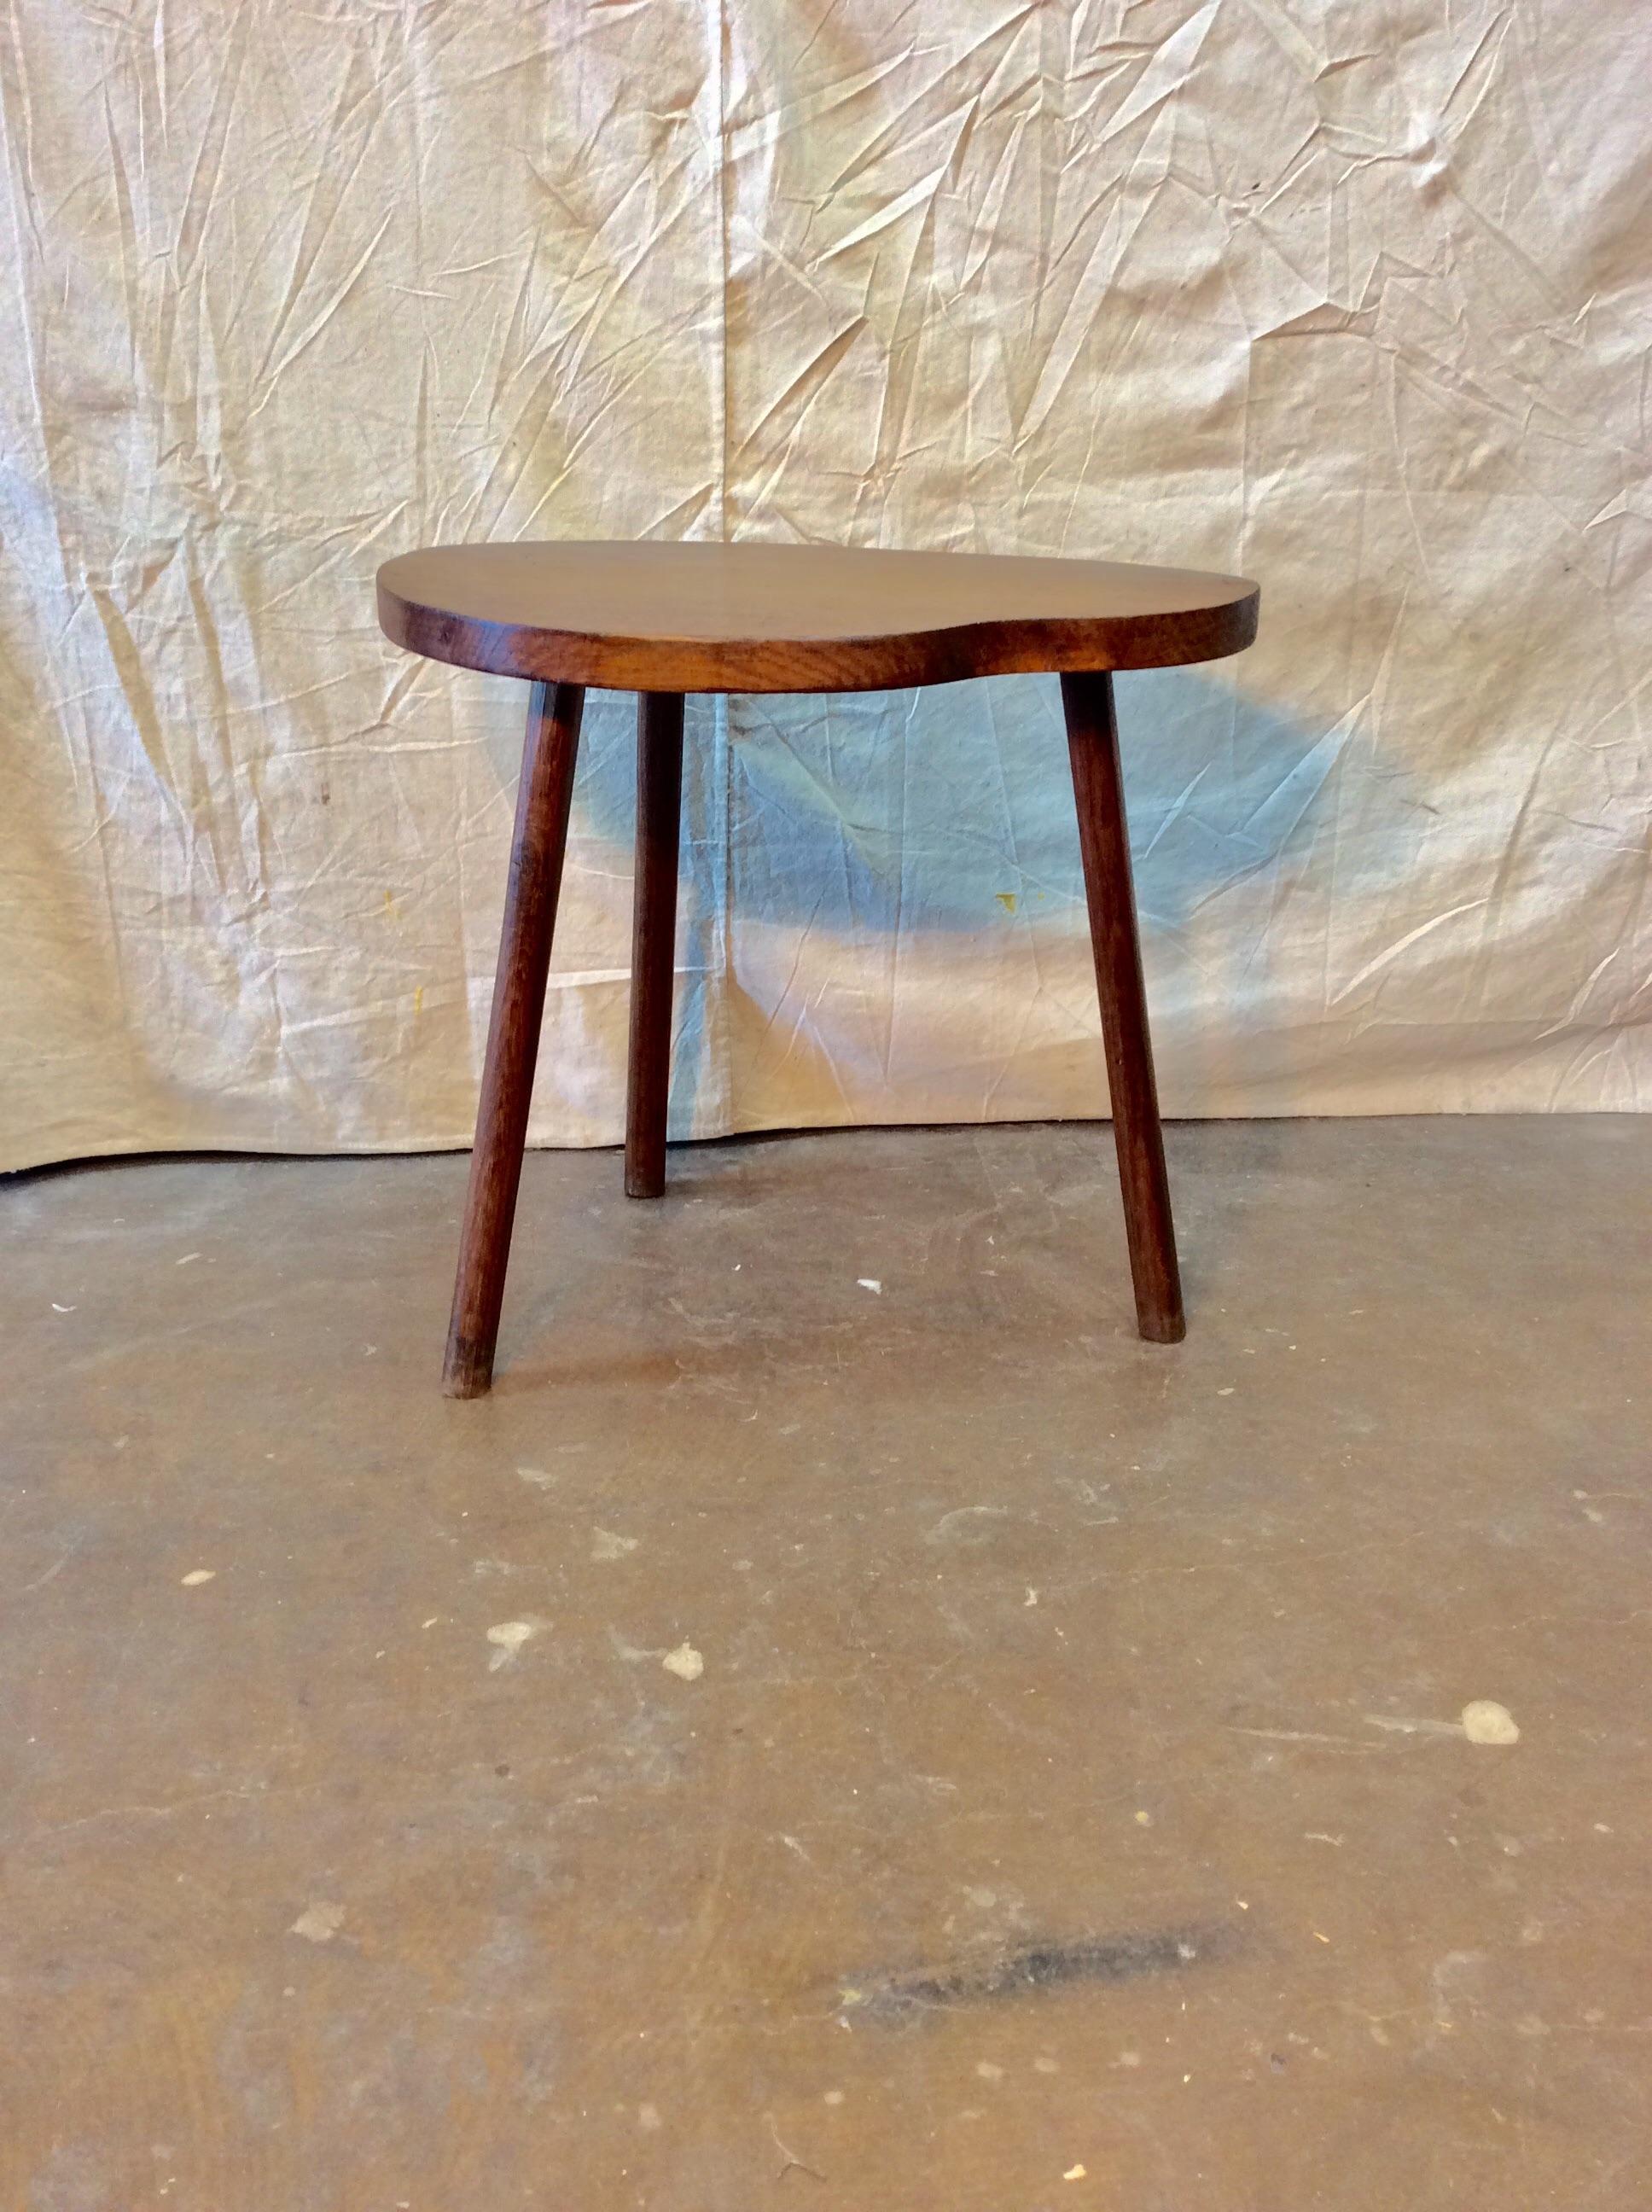 Found in the South of France, this Mid 20th Century French Oak Biomorphic Side Table is simple in design and high on impact. The piece features a freeform top over three legs. It’s organic biomorphic style makes for an amazing accent and